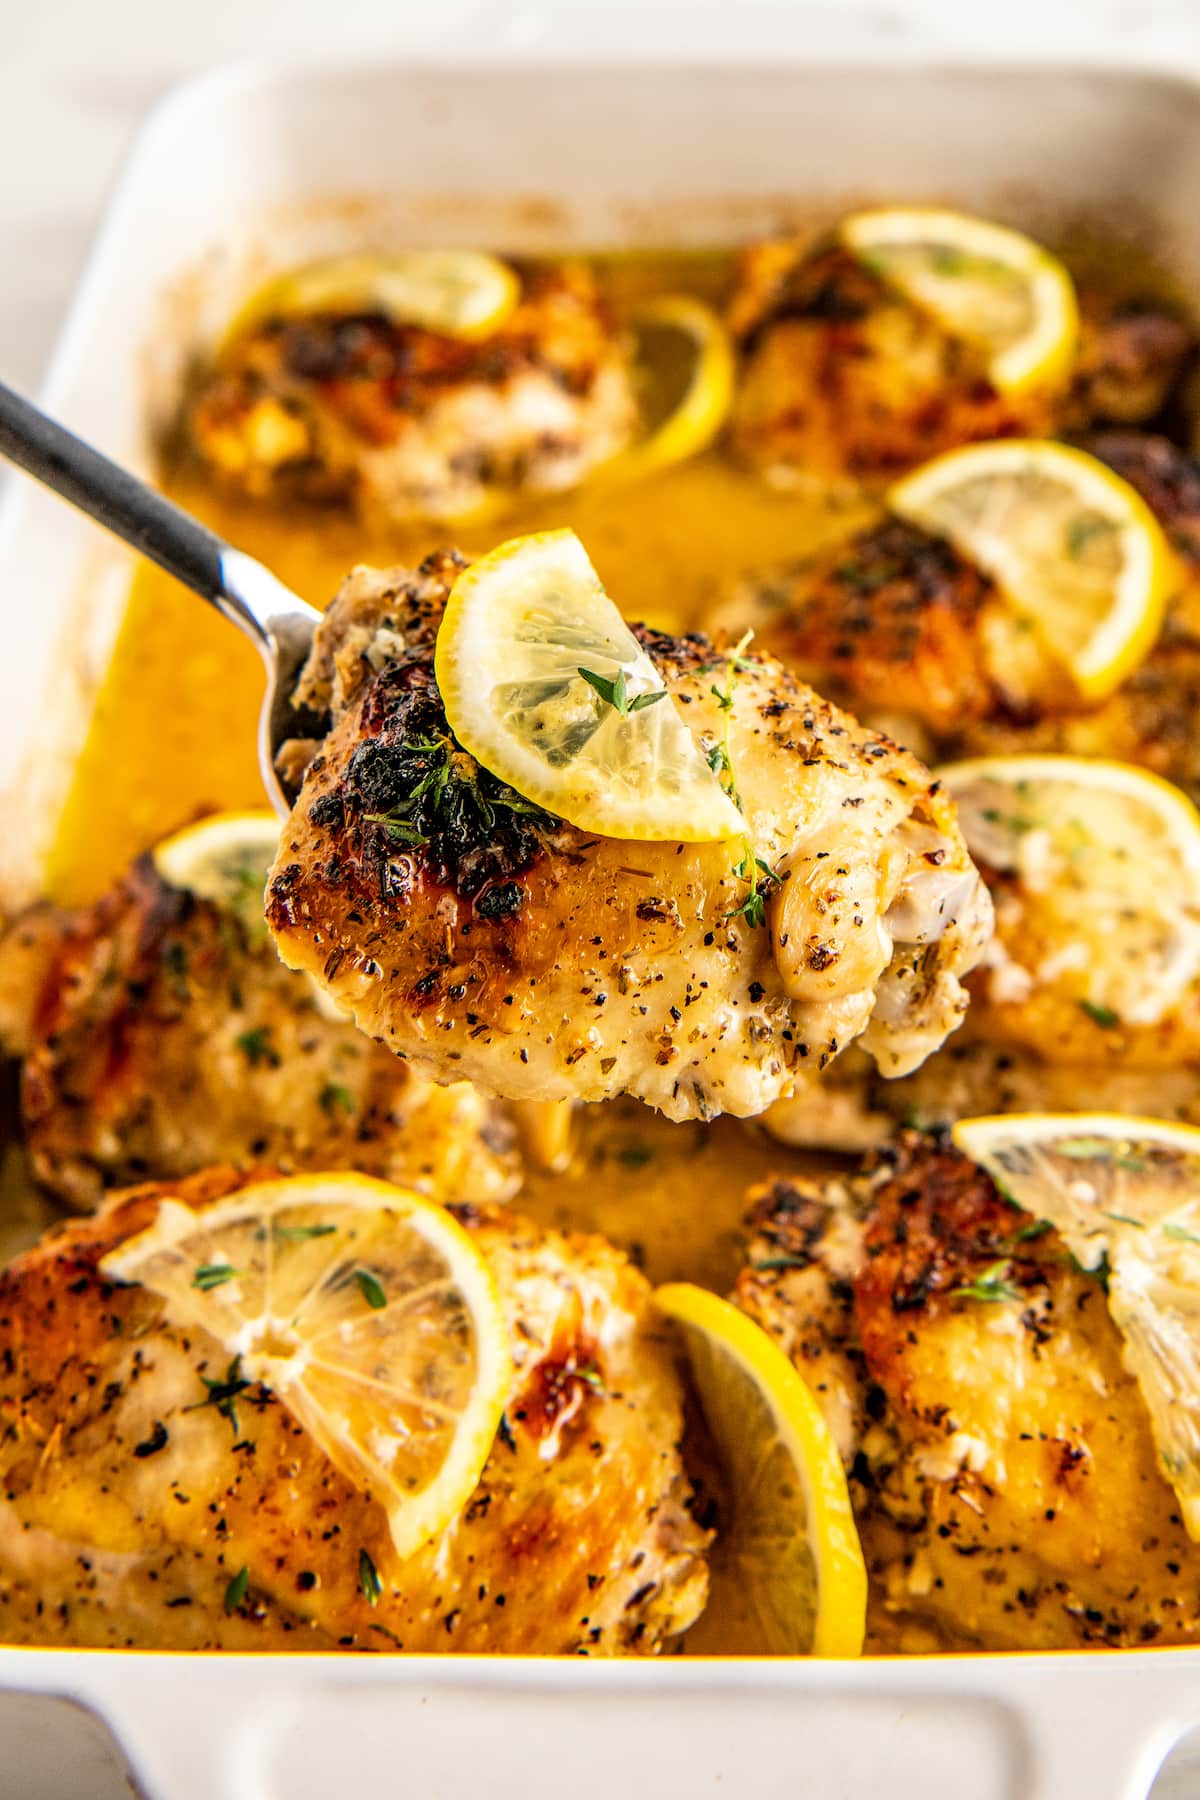 A serving spoon lifting a piece of lemon pepper baked chicken out of the roasting pan.